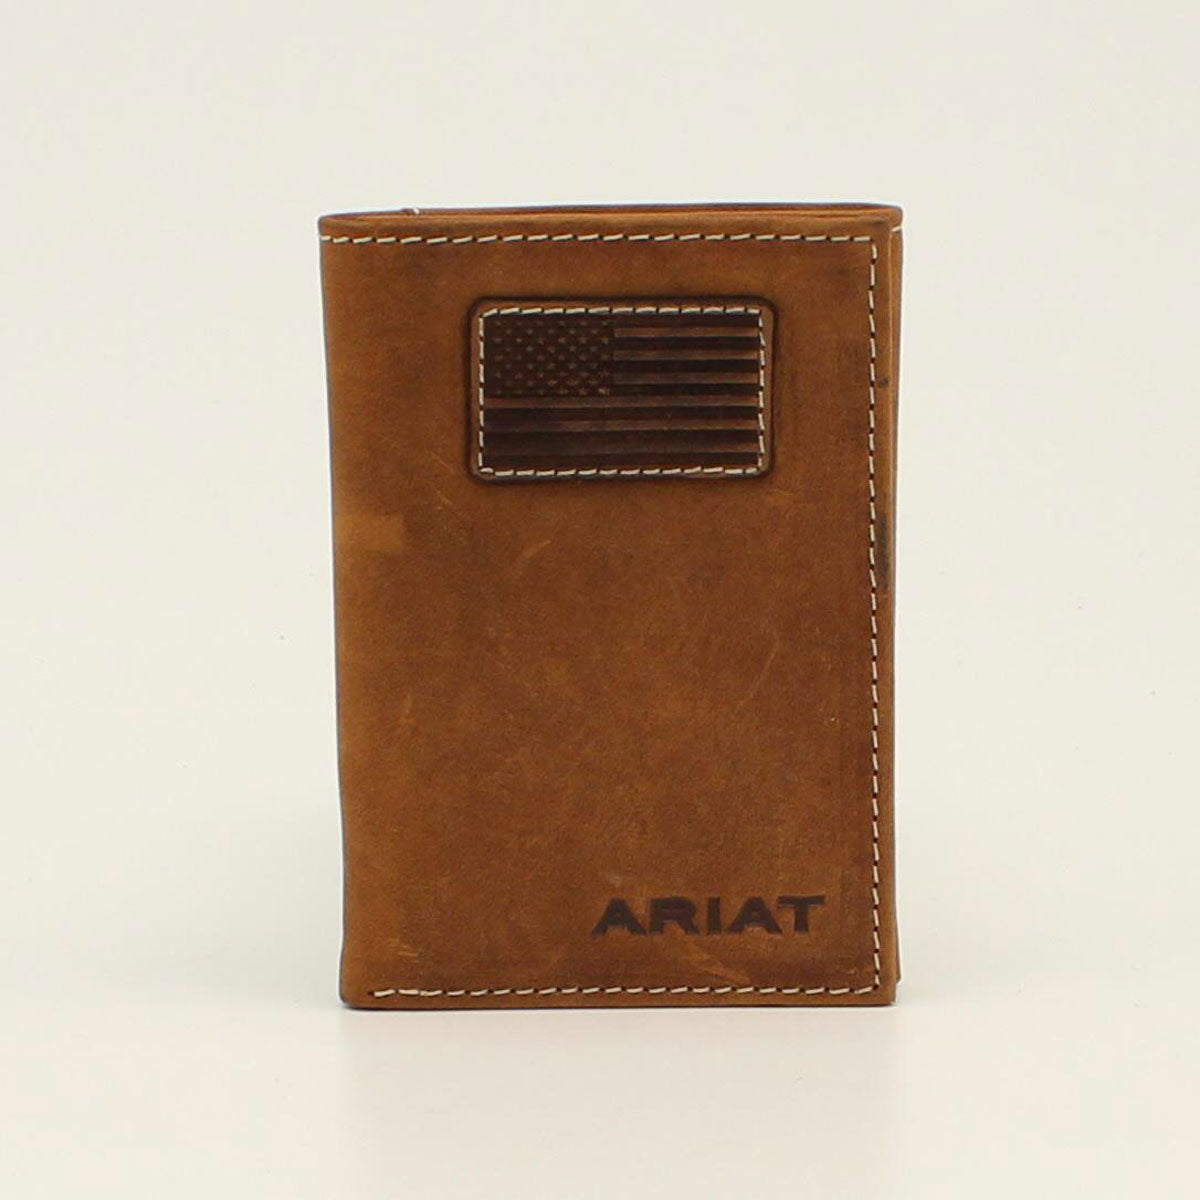 FLAG PATCH MEDIUM BROWN ARIAT TRIFOLD WALLET